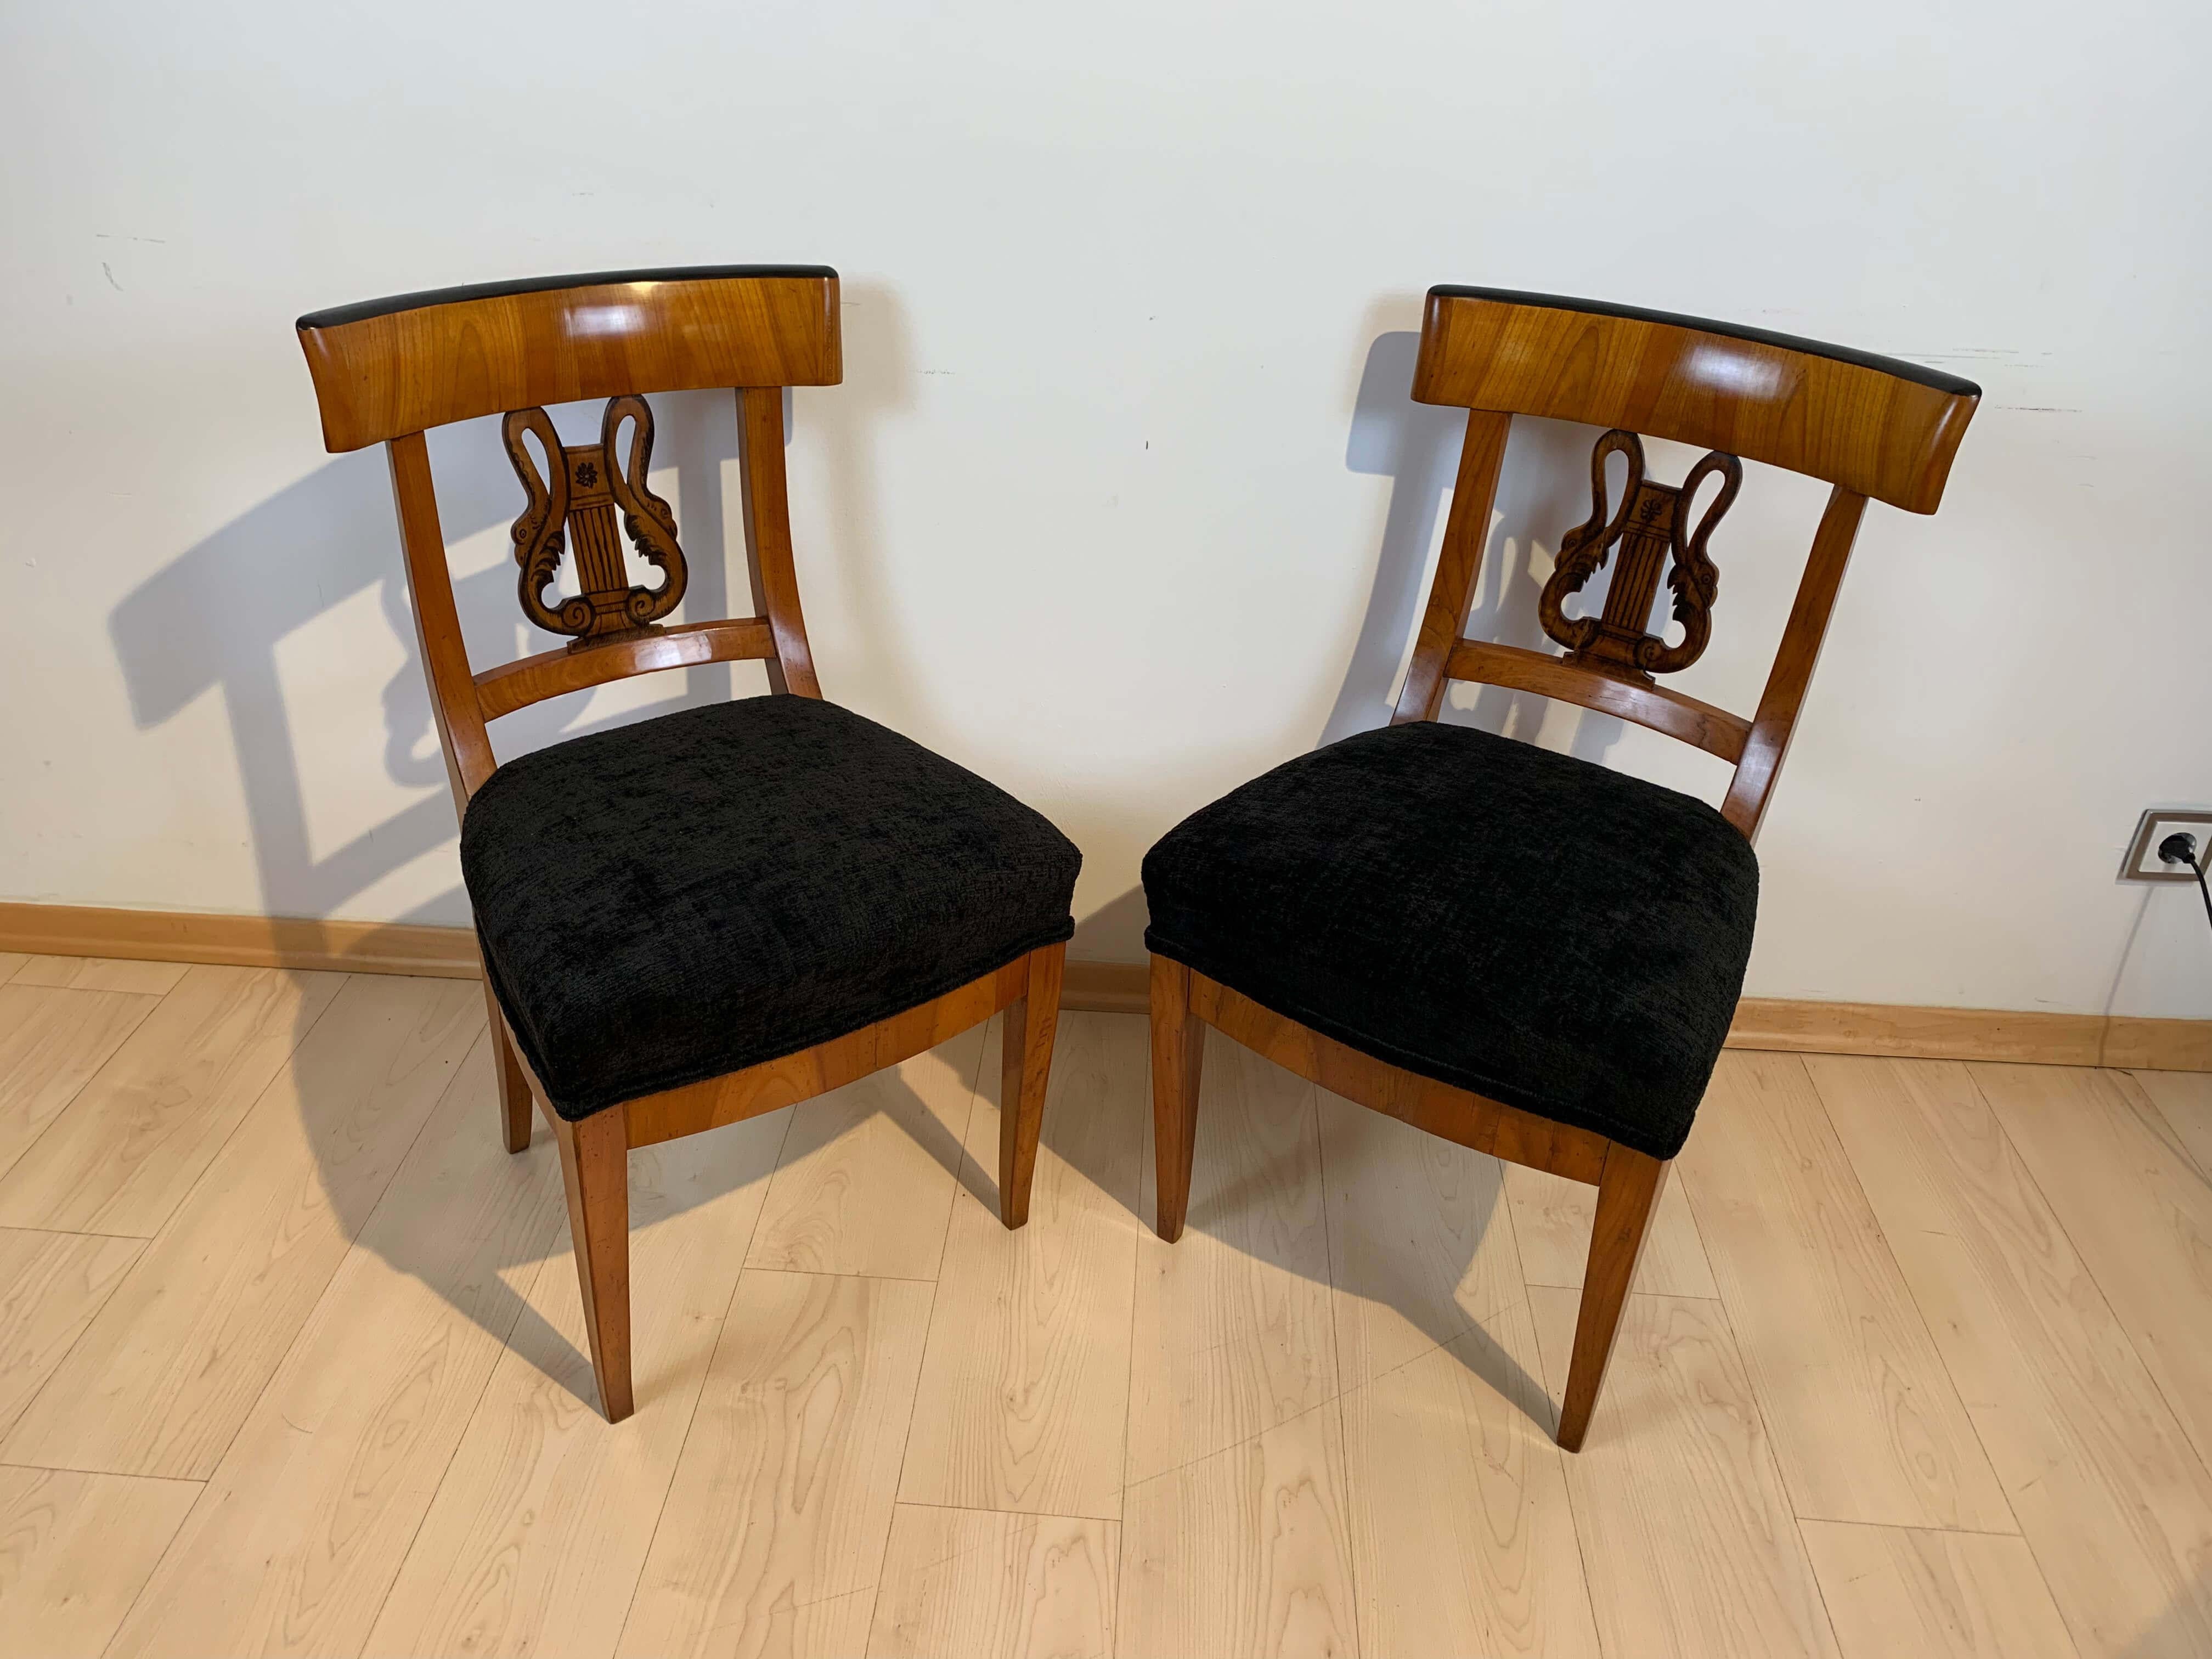 Early 20th Century Pair of Biedermeier Chairs, Cherry Wood, Painting, South Germany circa 1820